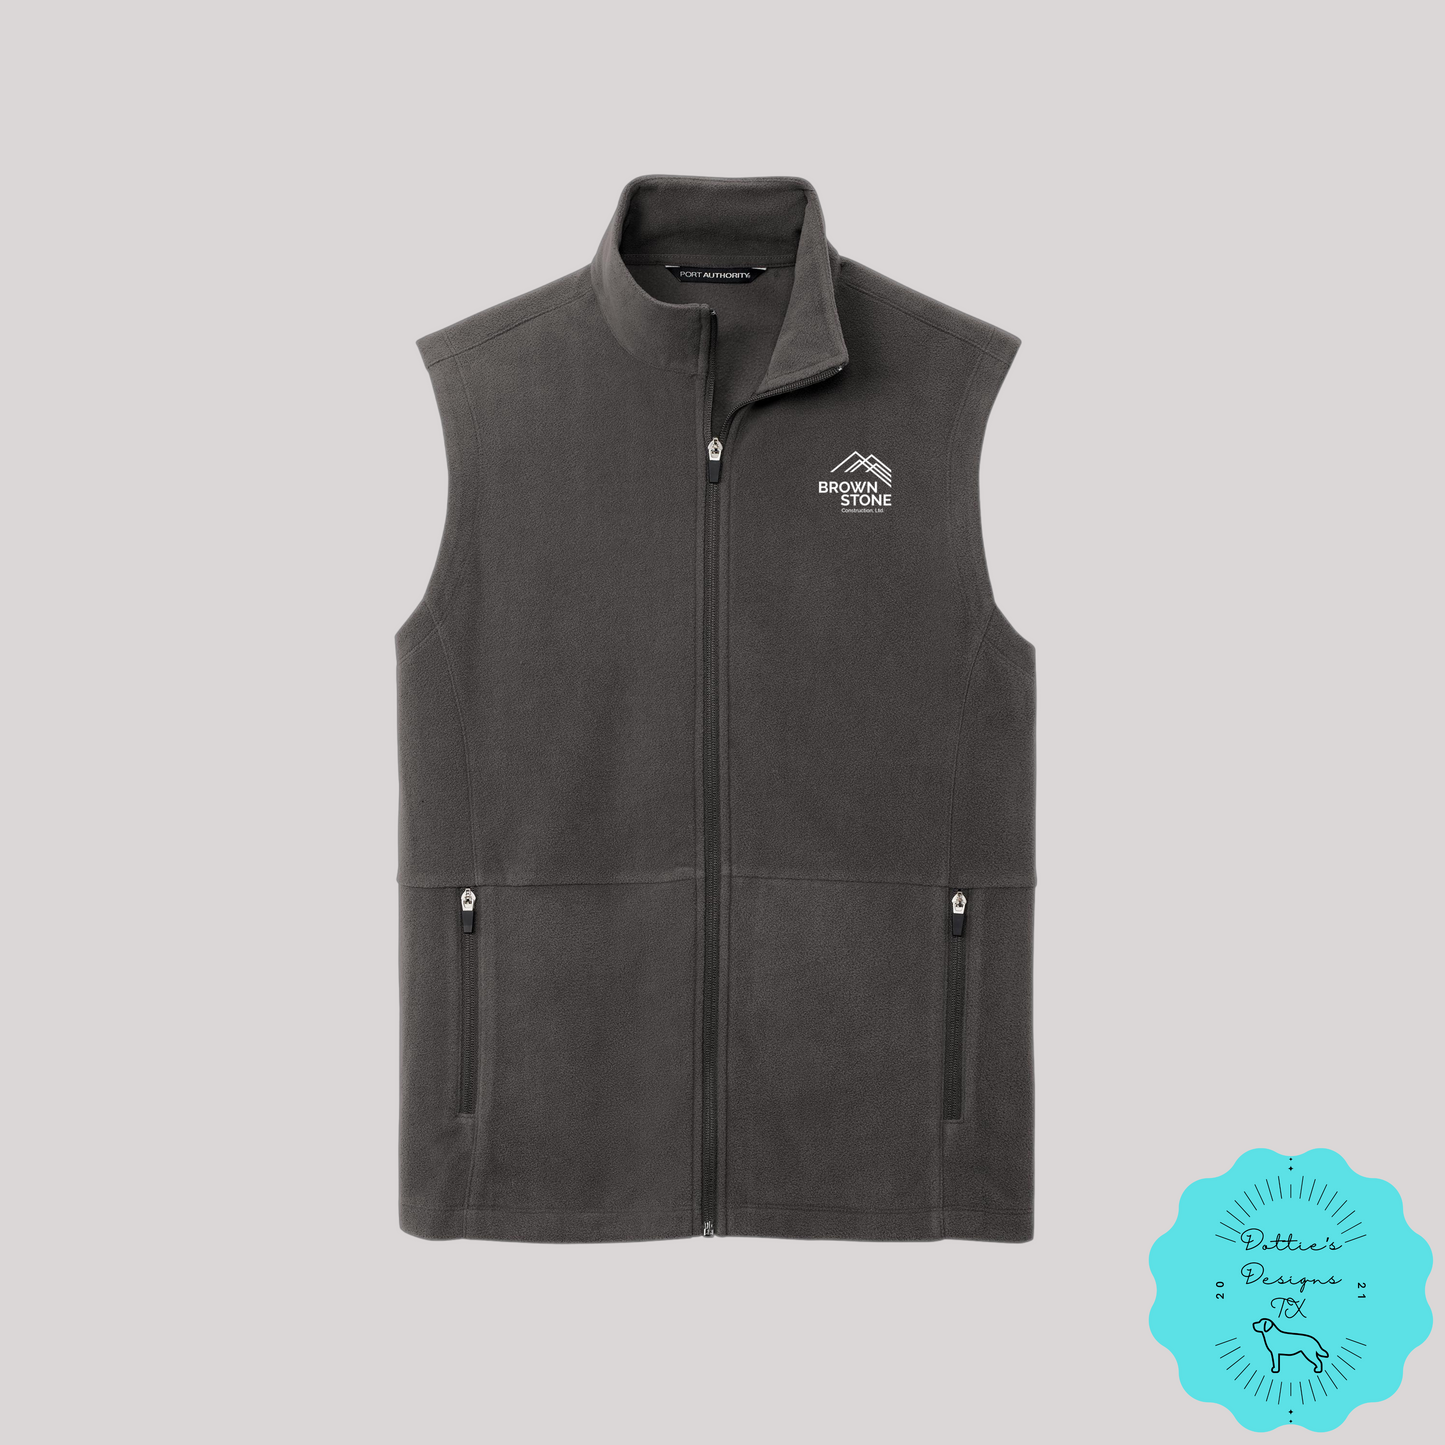 Brownstone Construction, LTD. Embroidered Accord Microfleece Vest